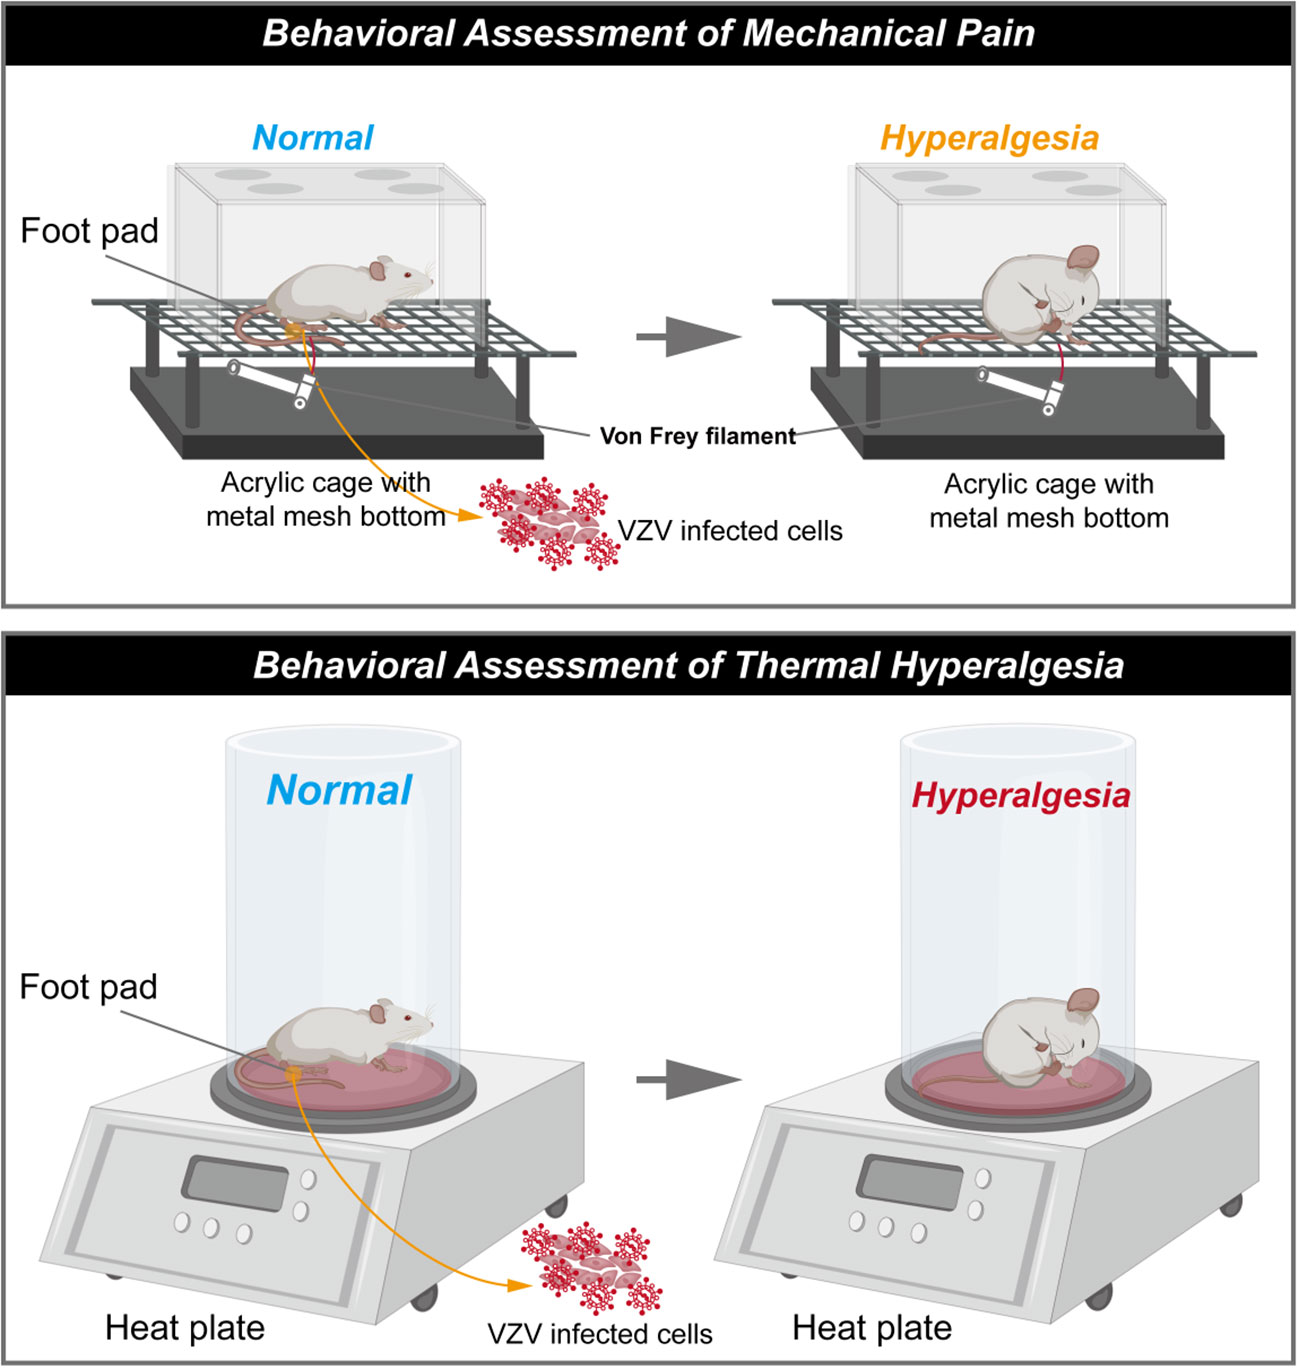 Hot/Cold Plate - Screening of Thermal Hyperalgesia/Allodynia